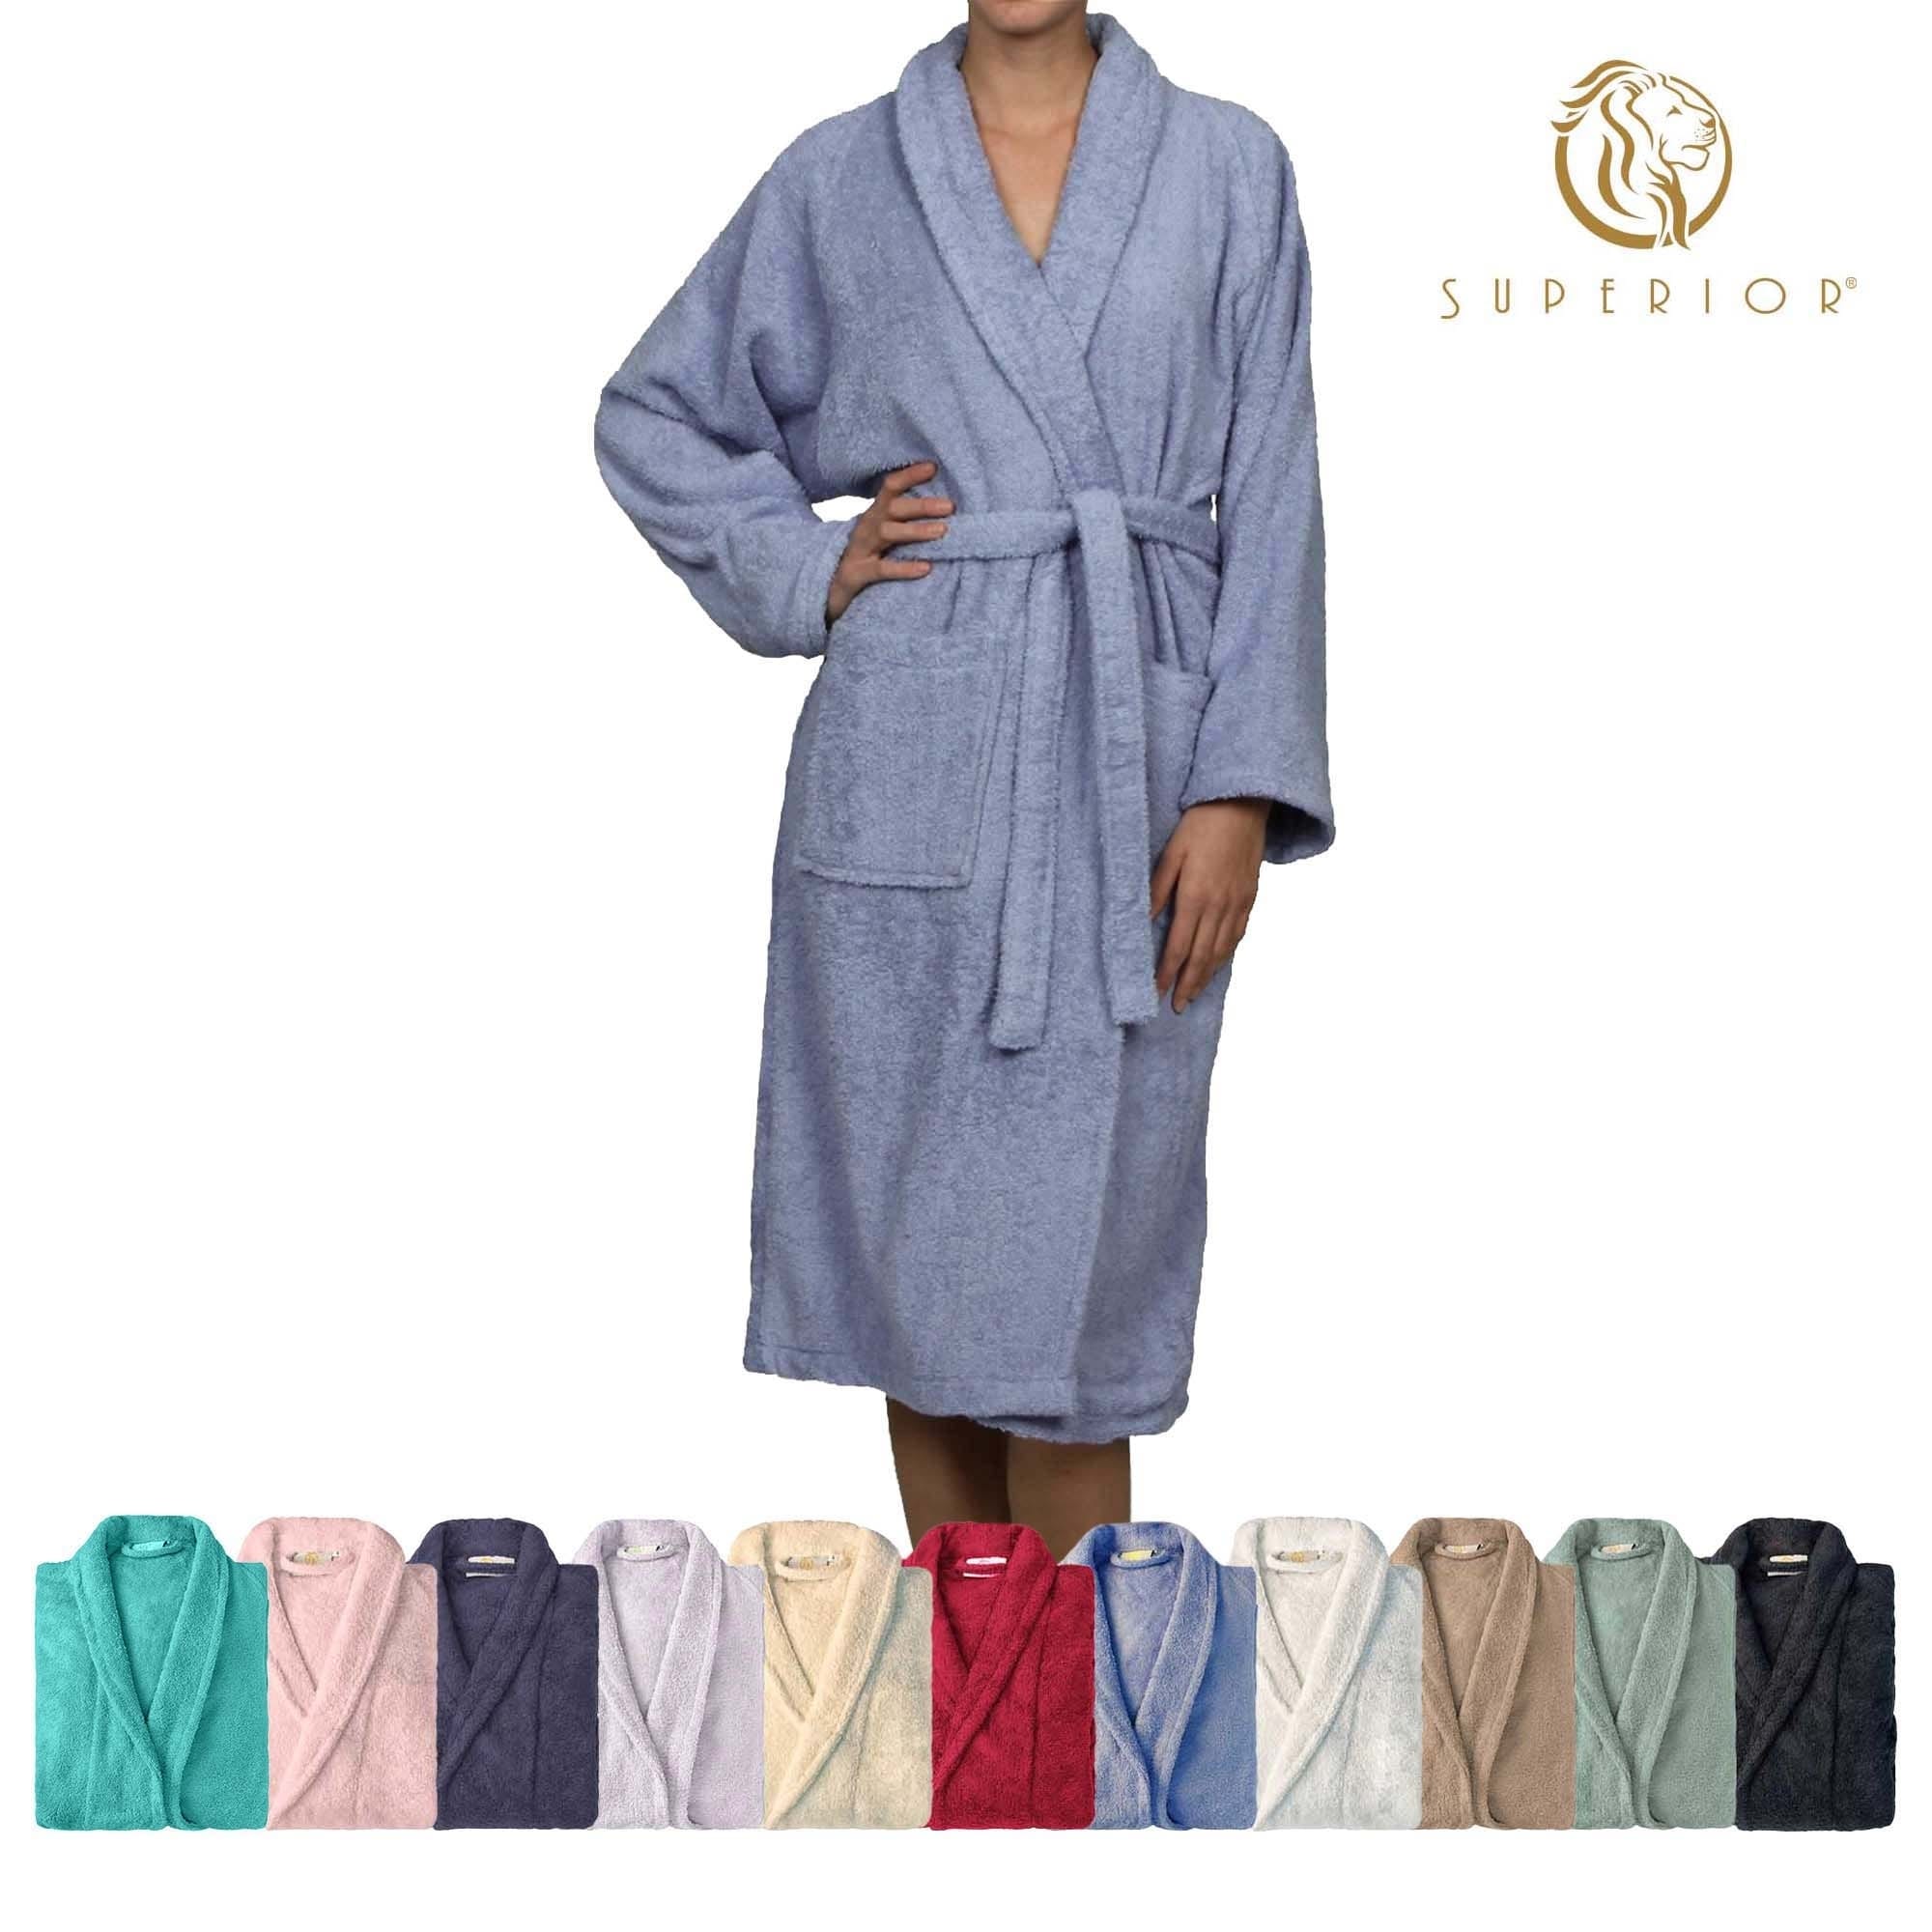 Terry Cloth Bathrobes for Women 100% Cotton Hooded Robes Soft